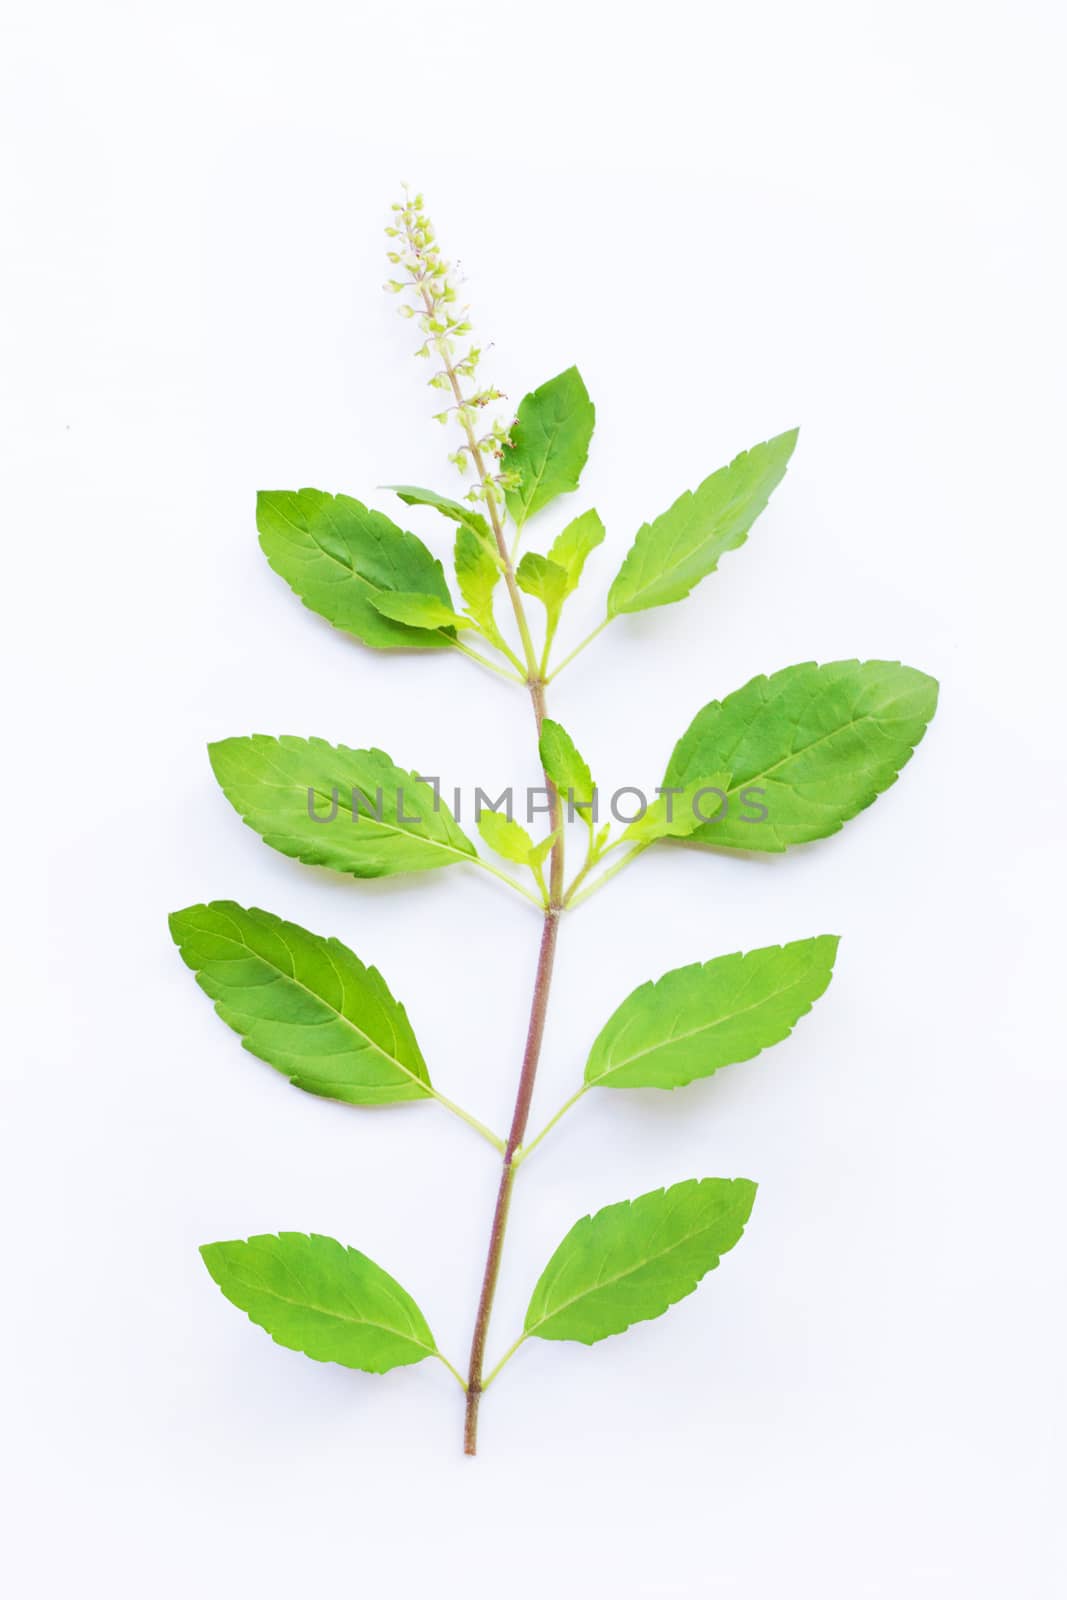 Holy Basil on white background. Top view